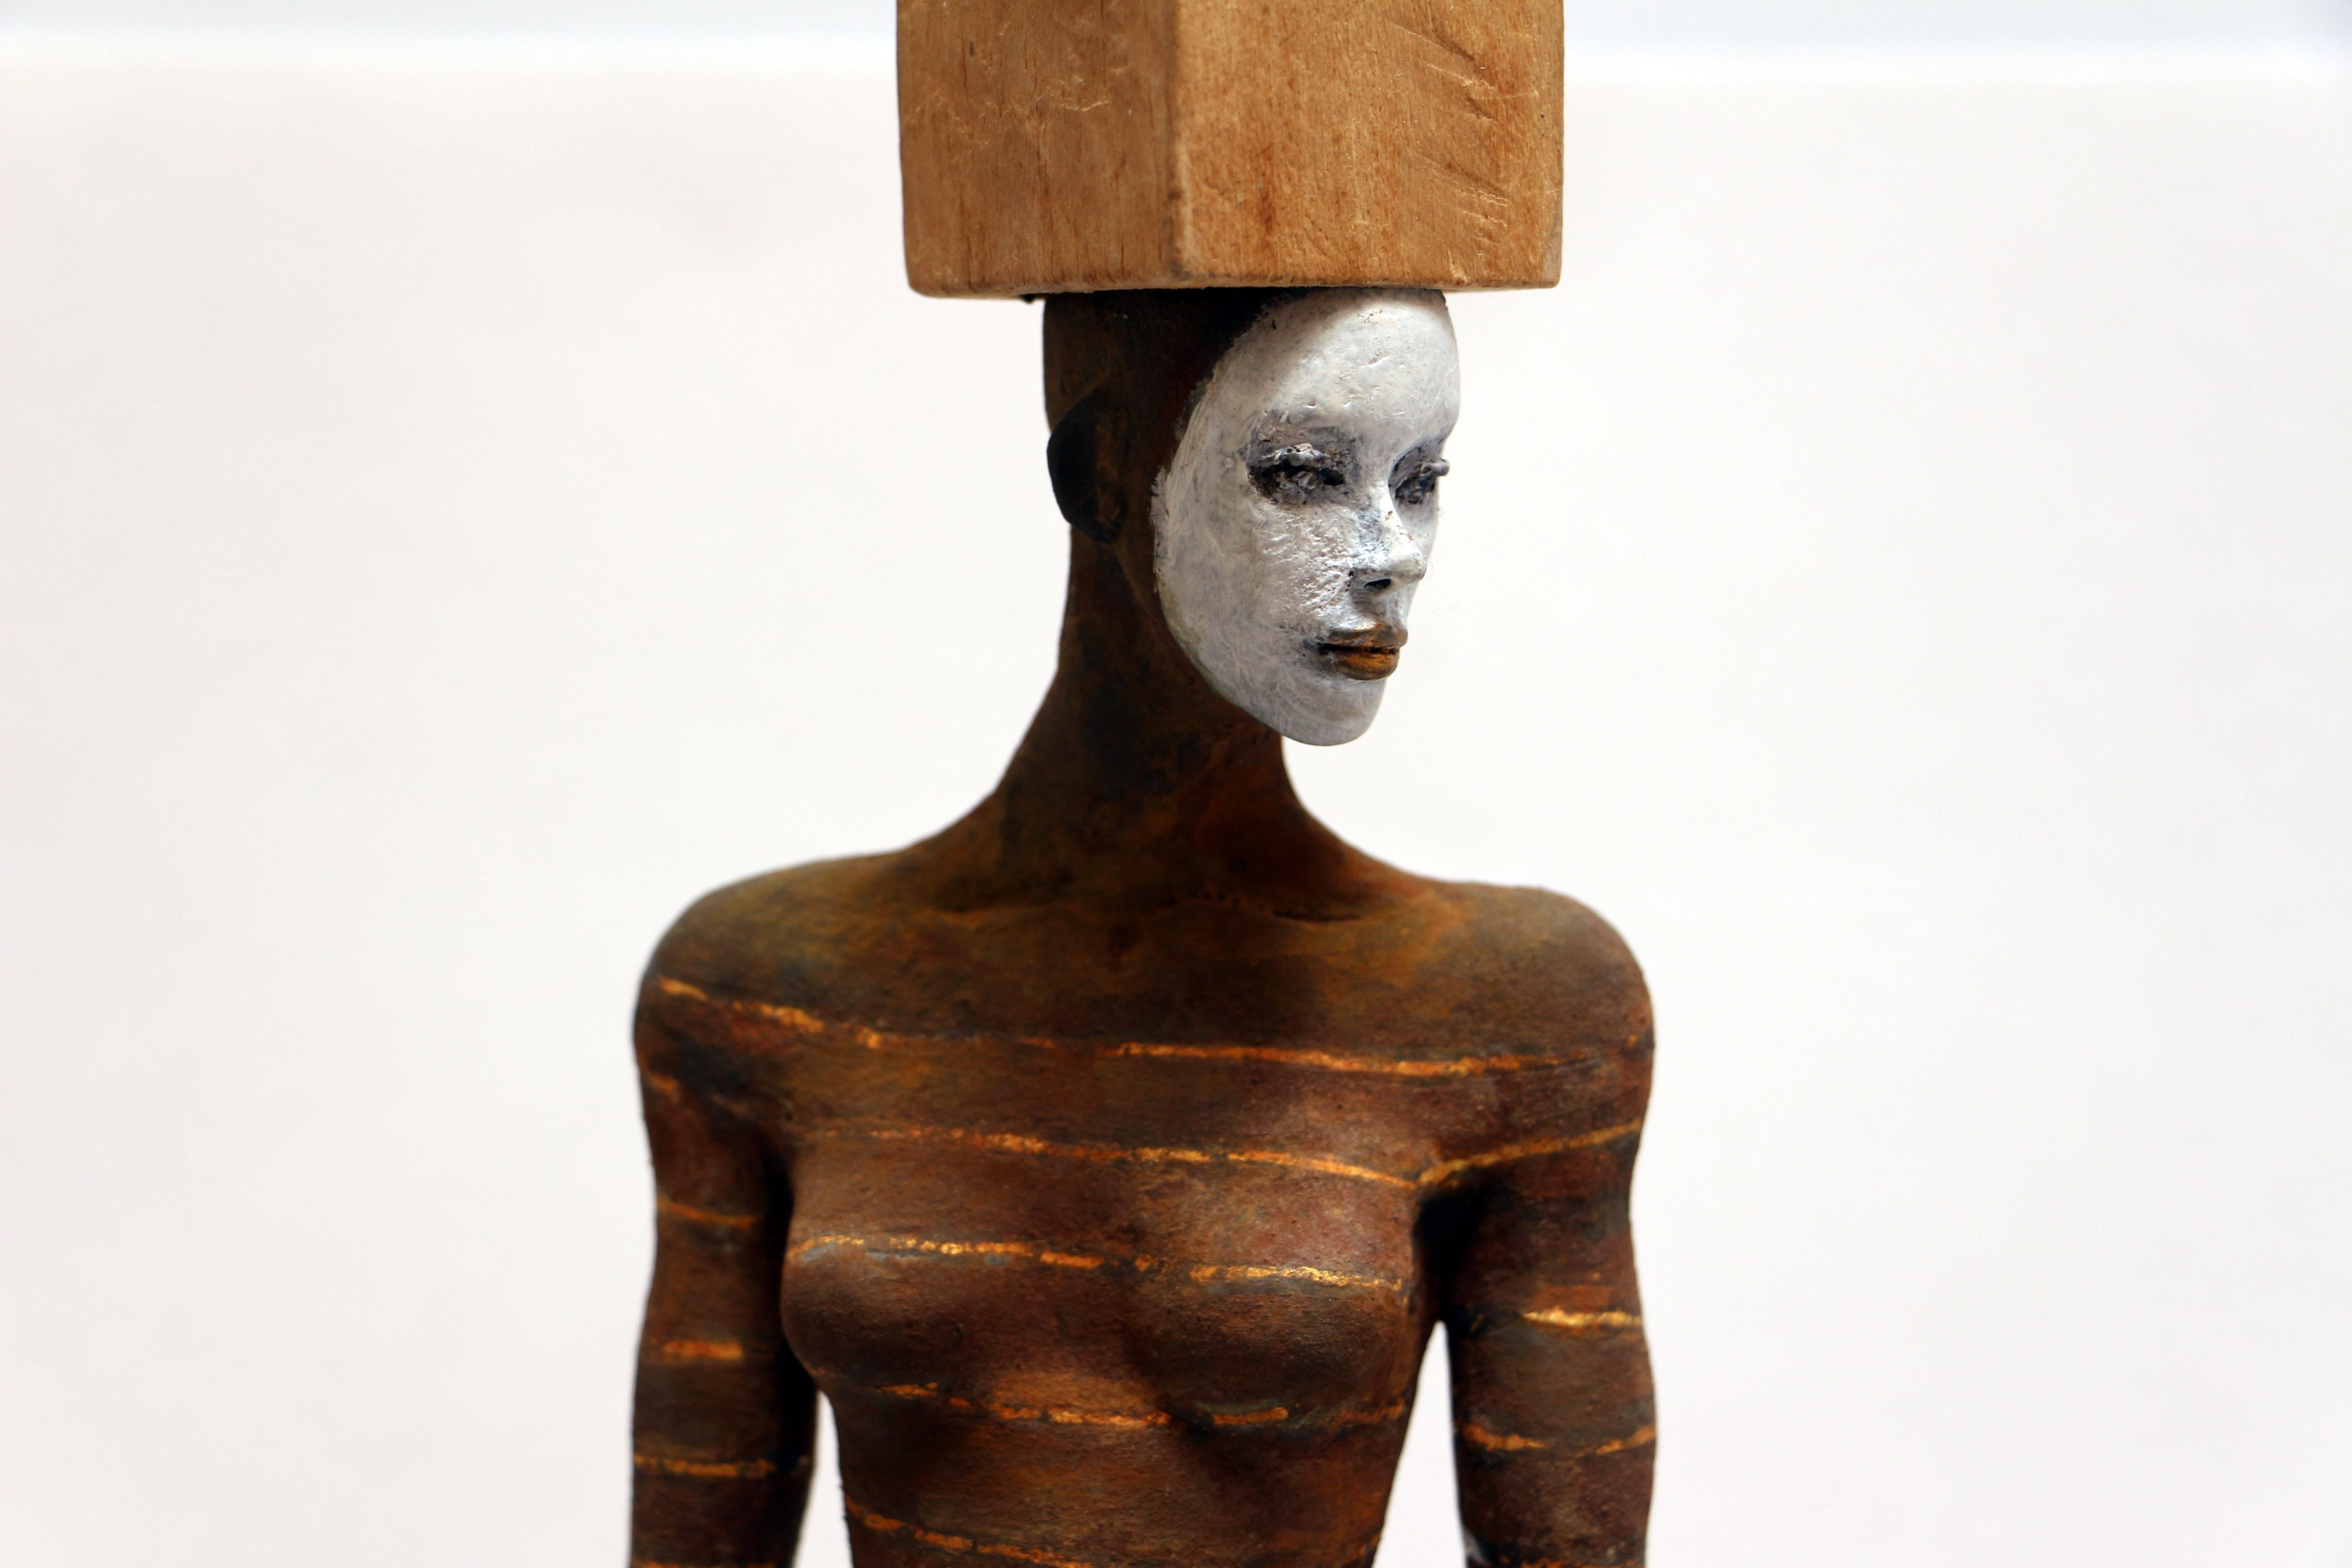 This wood and bronze sculpture depicts a nude female figure with a painted white face and horizontal stripes along the body. She is standing on a base, and wears a head accessory that consists of an open structure with small spherical shapes.